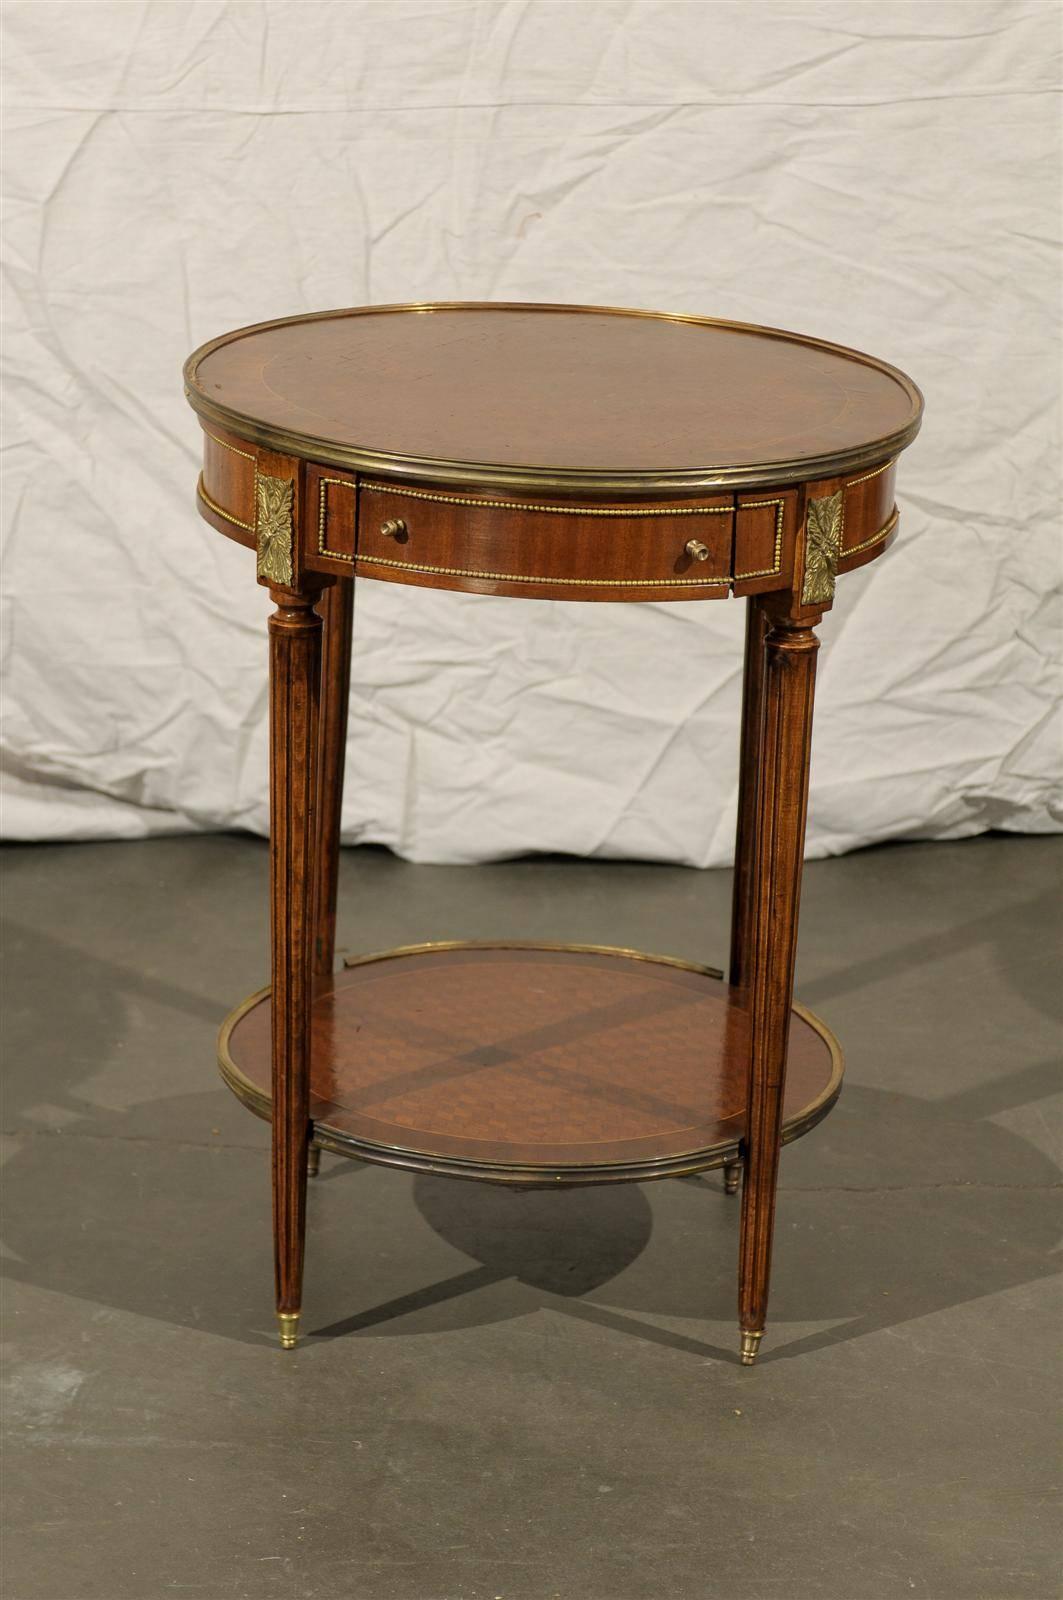 Early 20th Century French Bronze-Mounted Inlaid Bouilotte Table 4